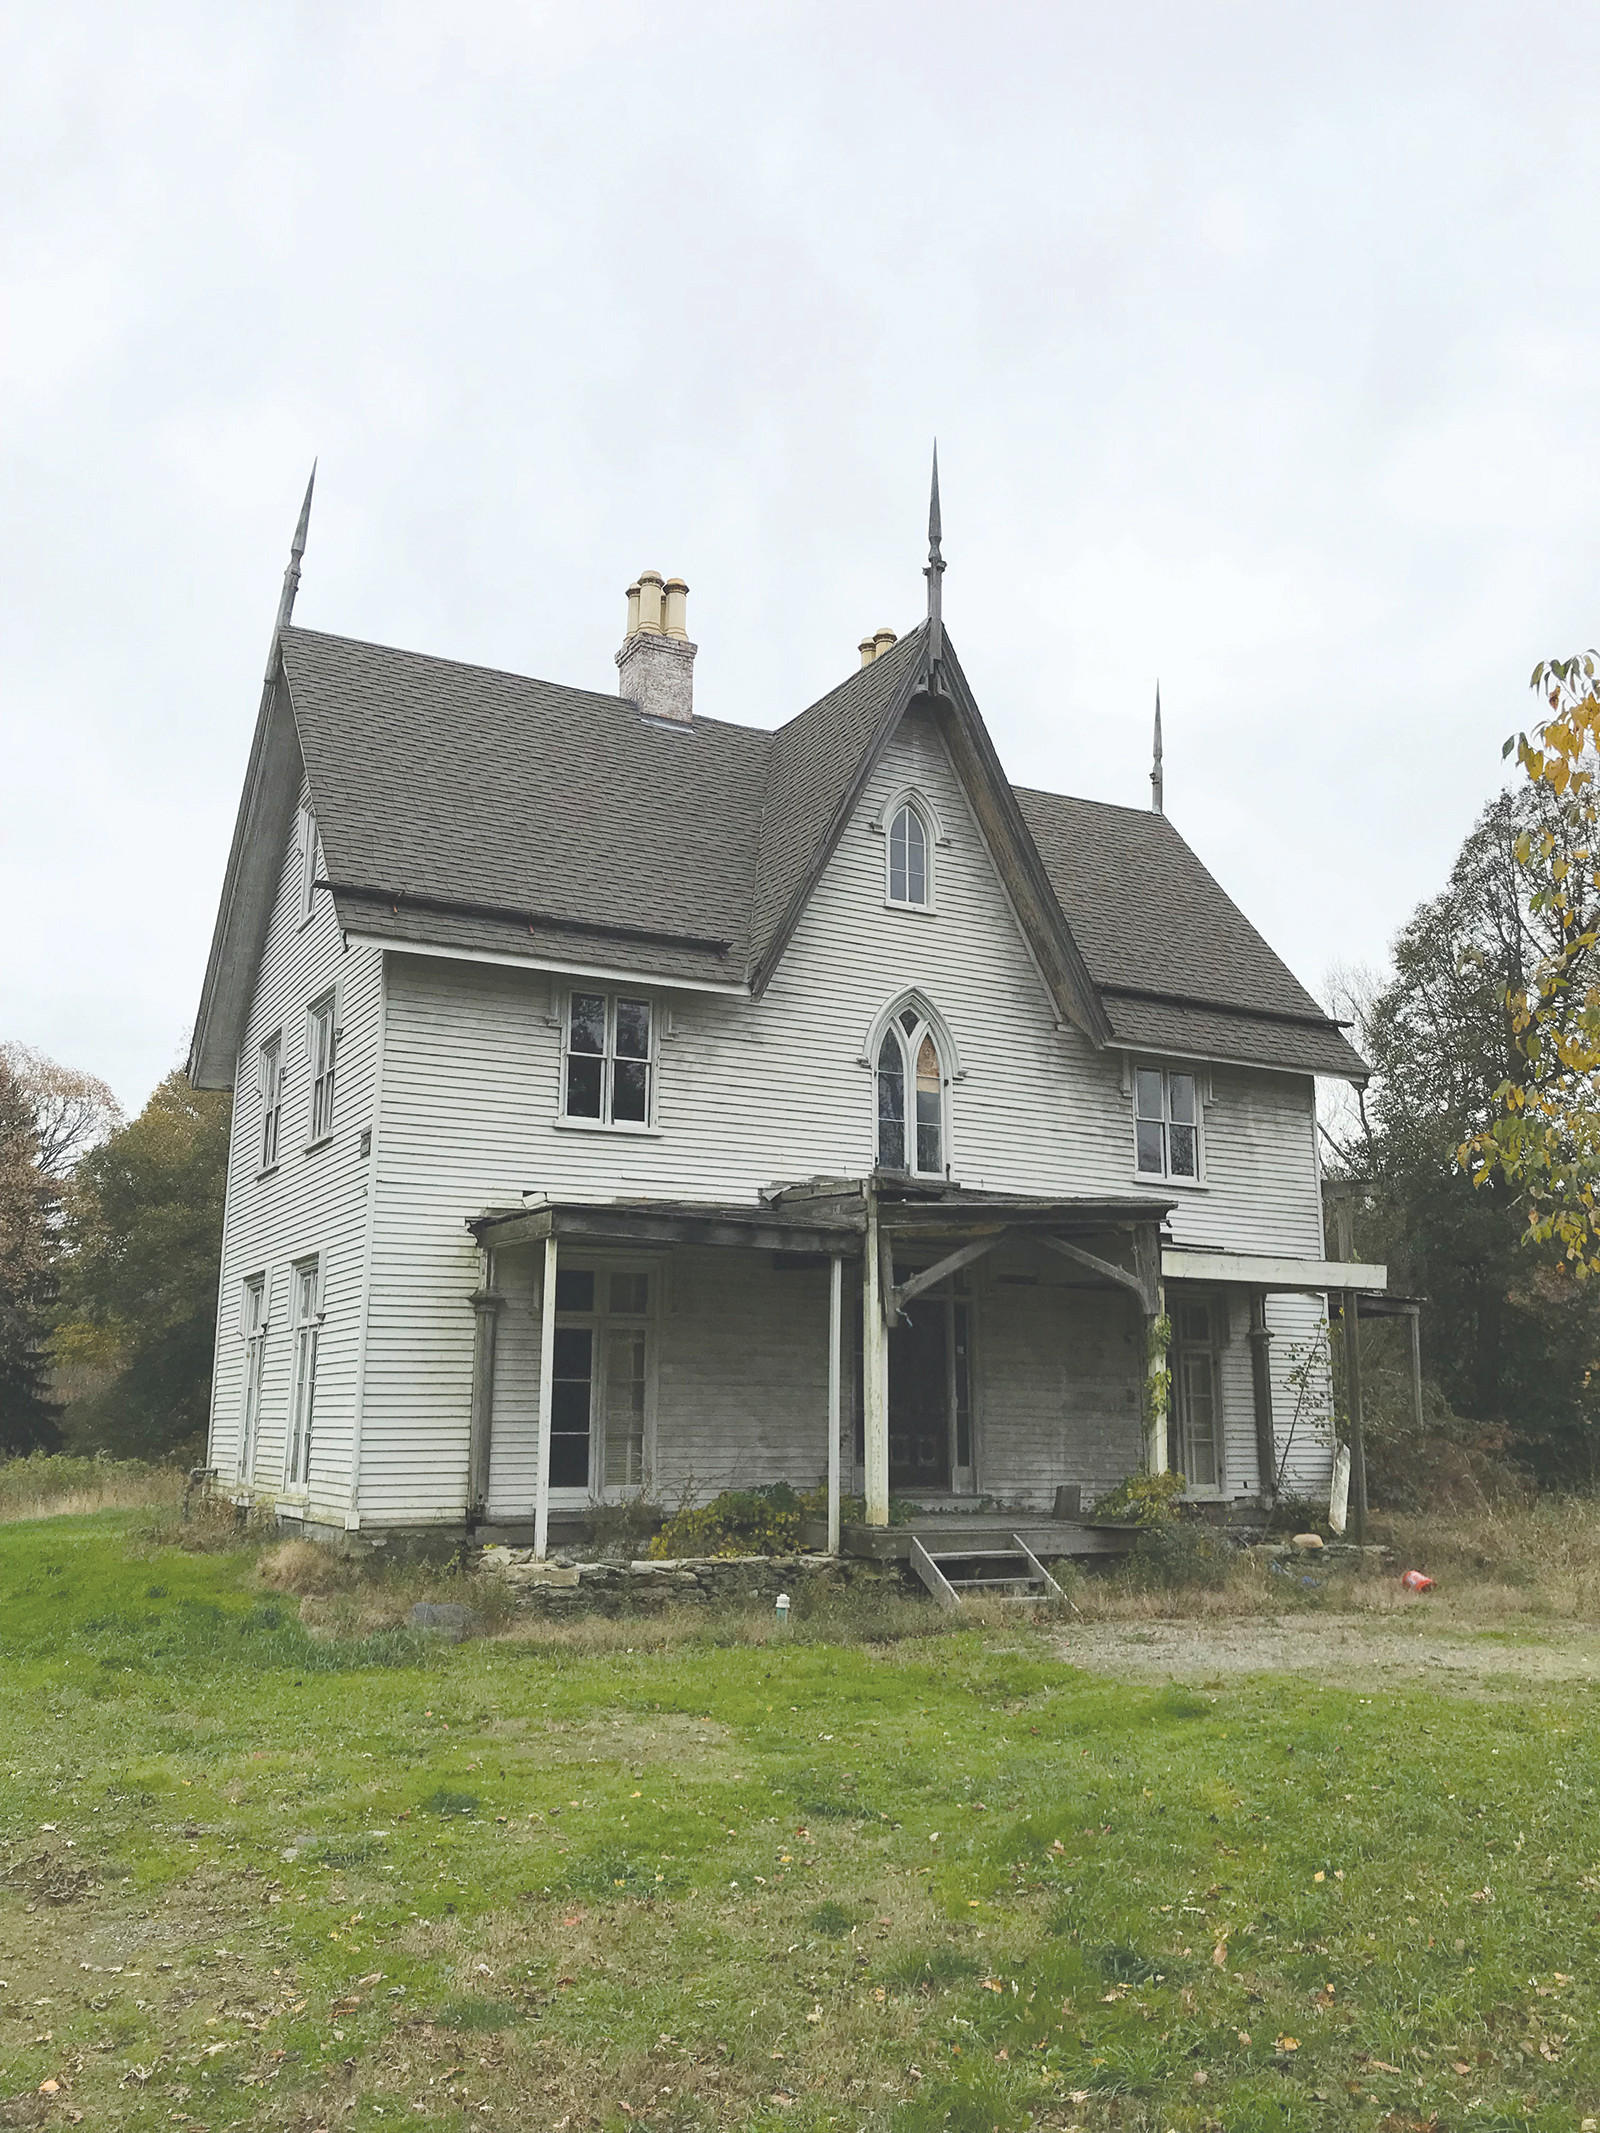 Known as the "Longfield House," the three-story home was gutted with intentions of turning it into a bed and breakfast, but the work was never completed.